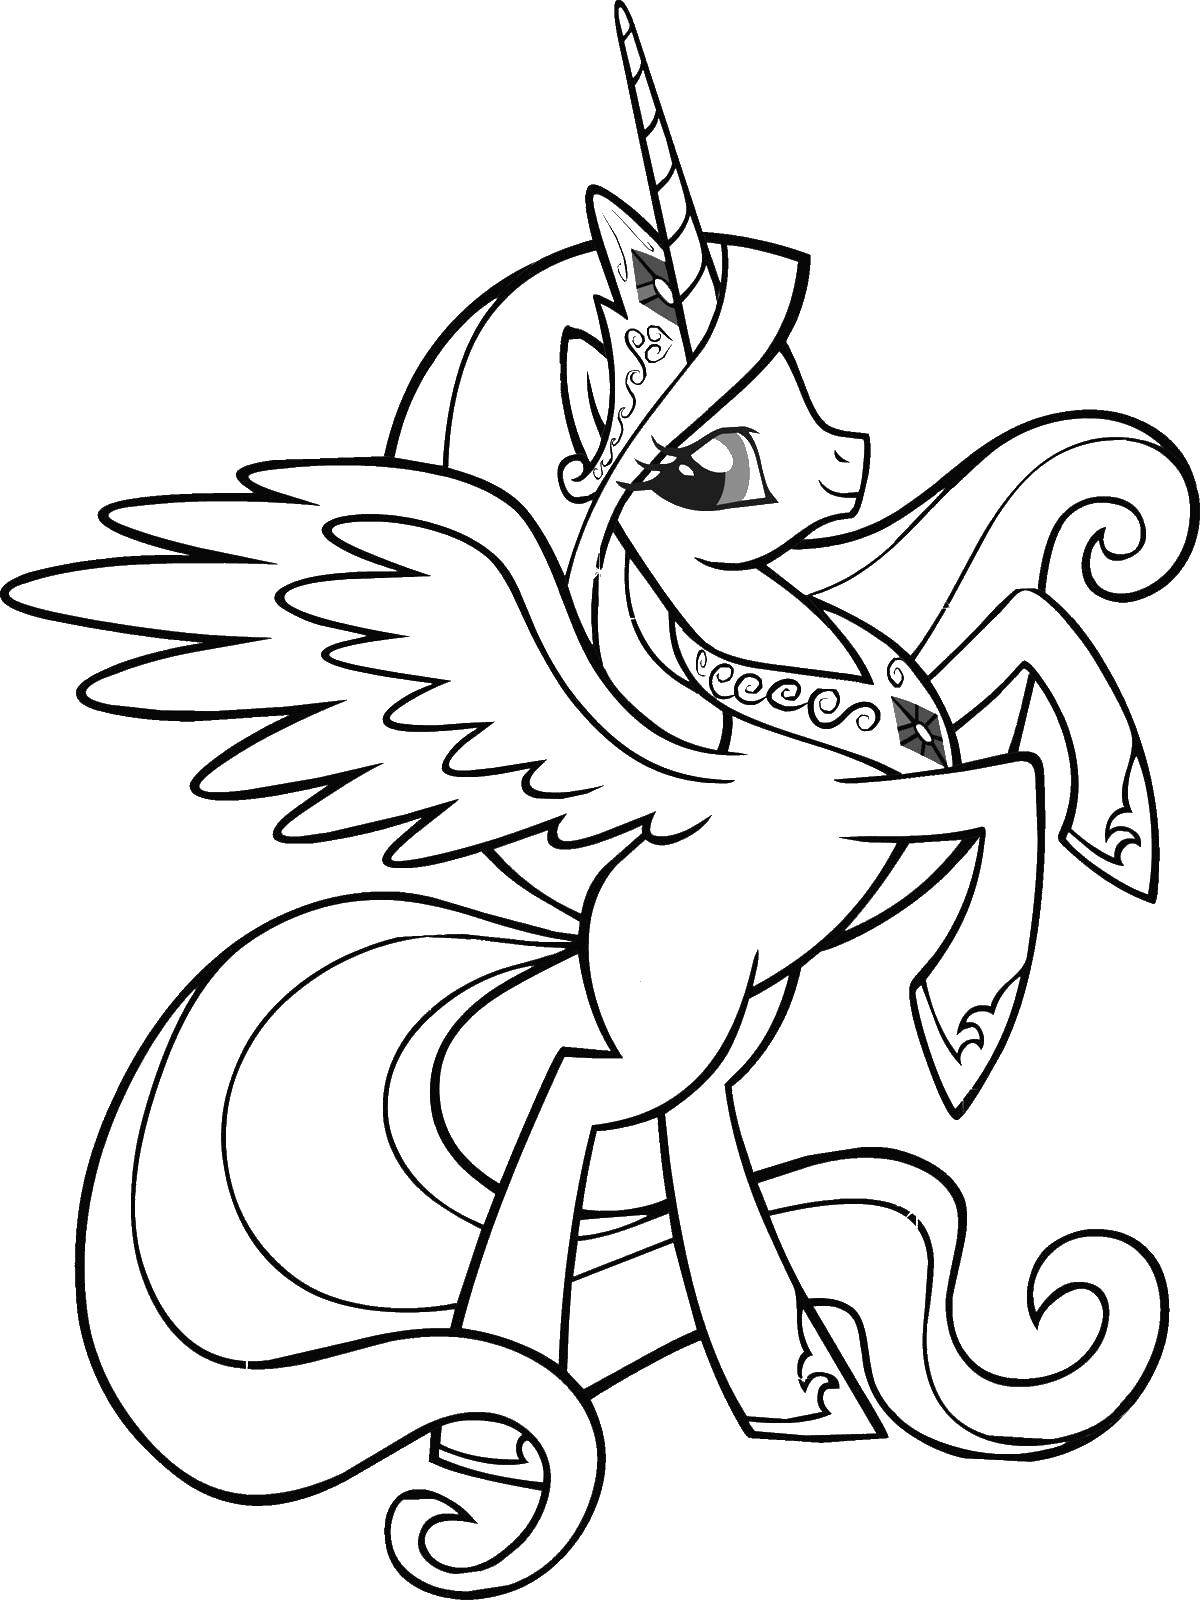 Coloring Winged unicorn pony. Category Ponies. Tags:  pony tale, girls.